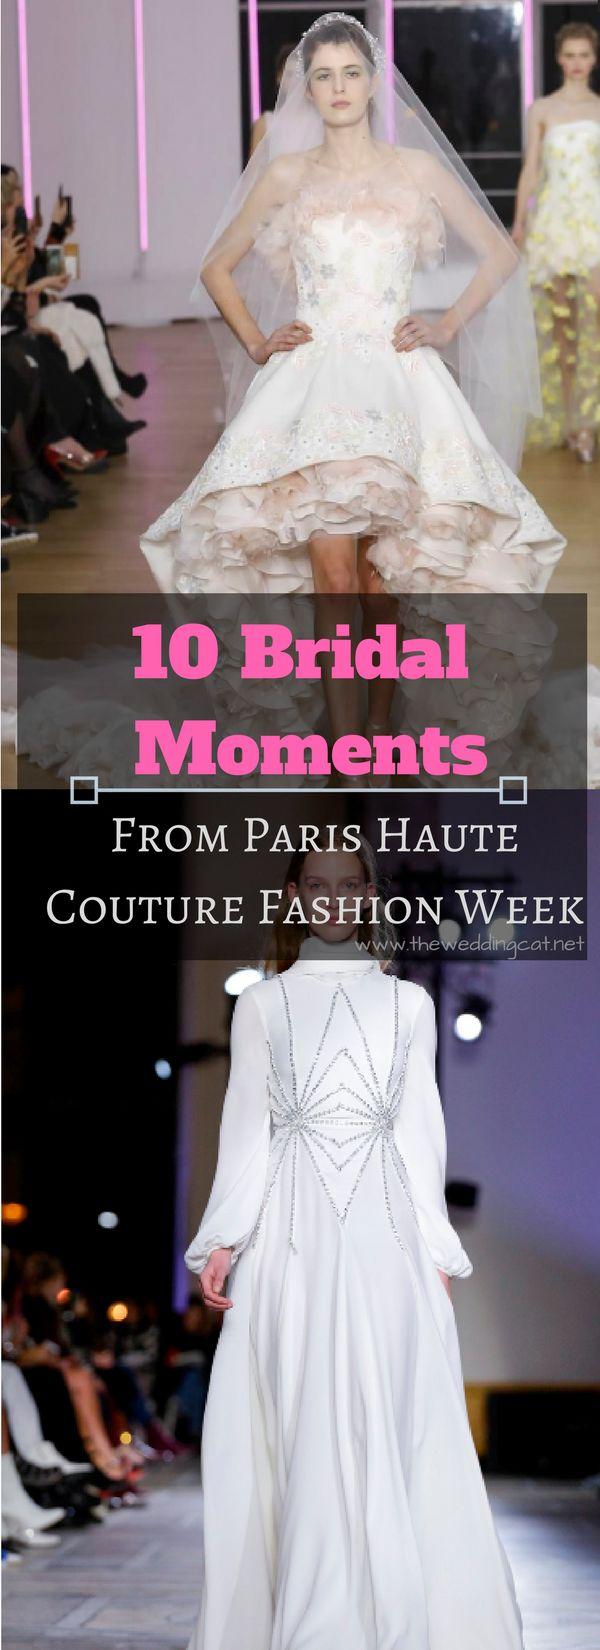 Wedding - 10 Bridal Moments From Haute Couture Fashion Week